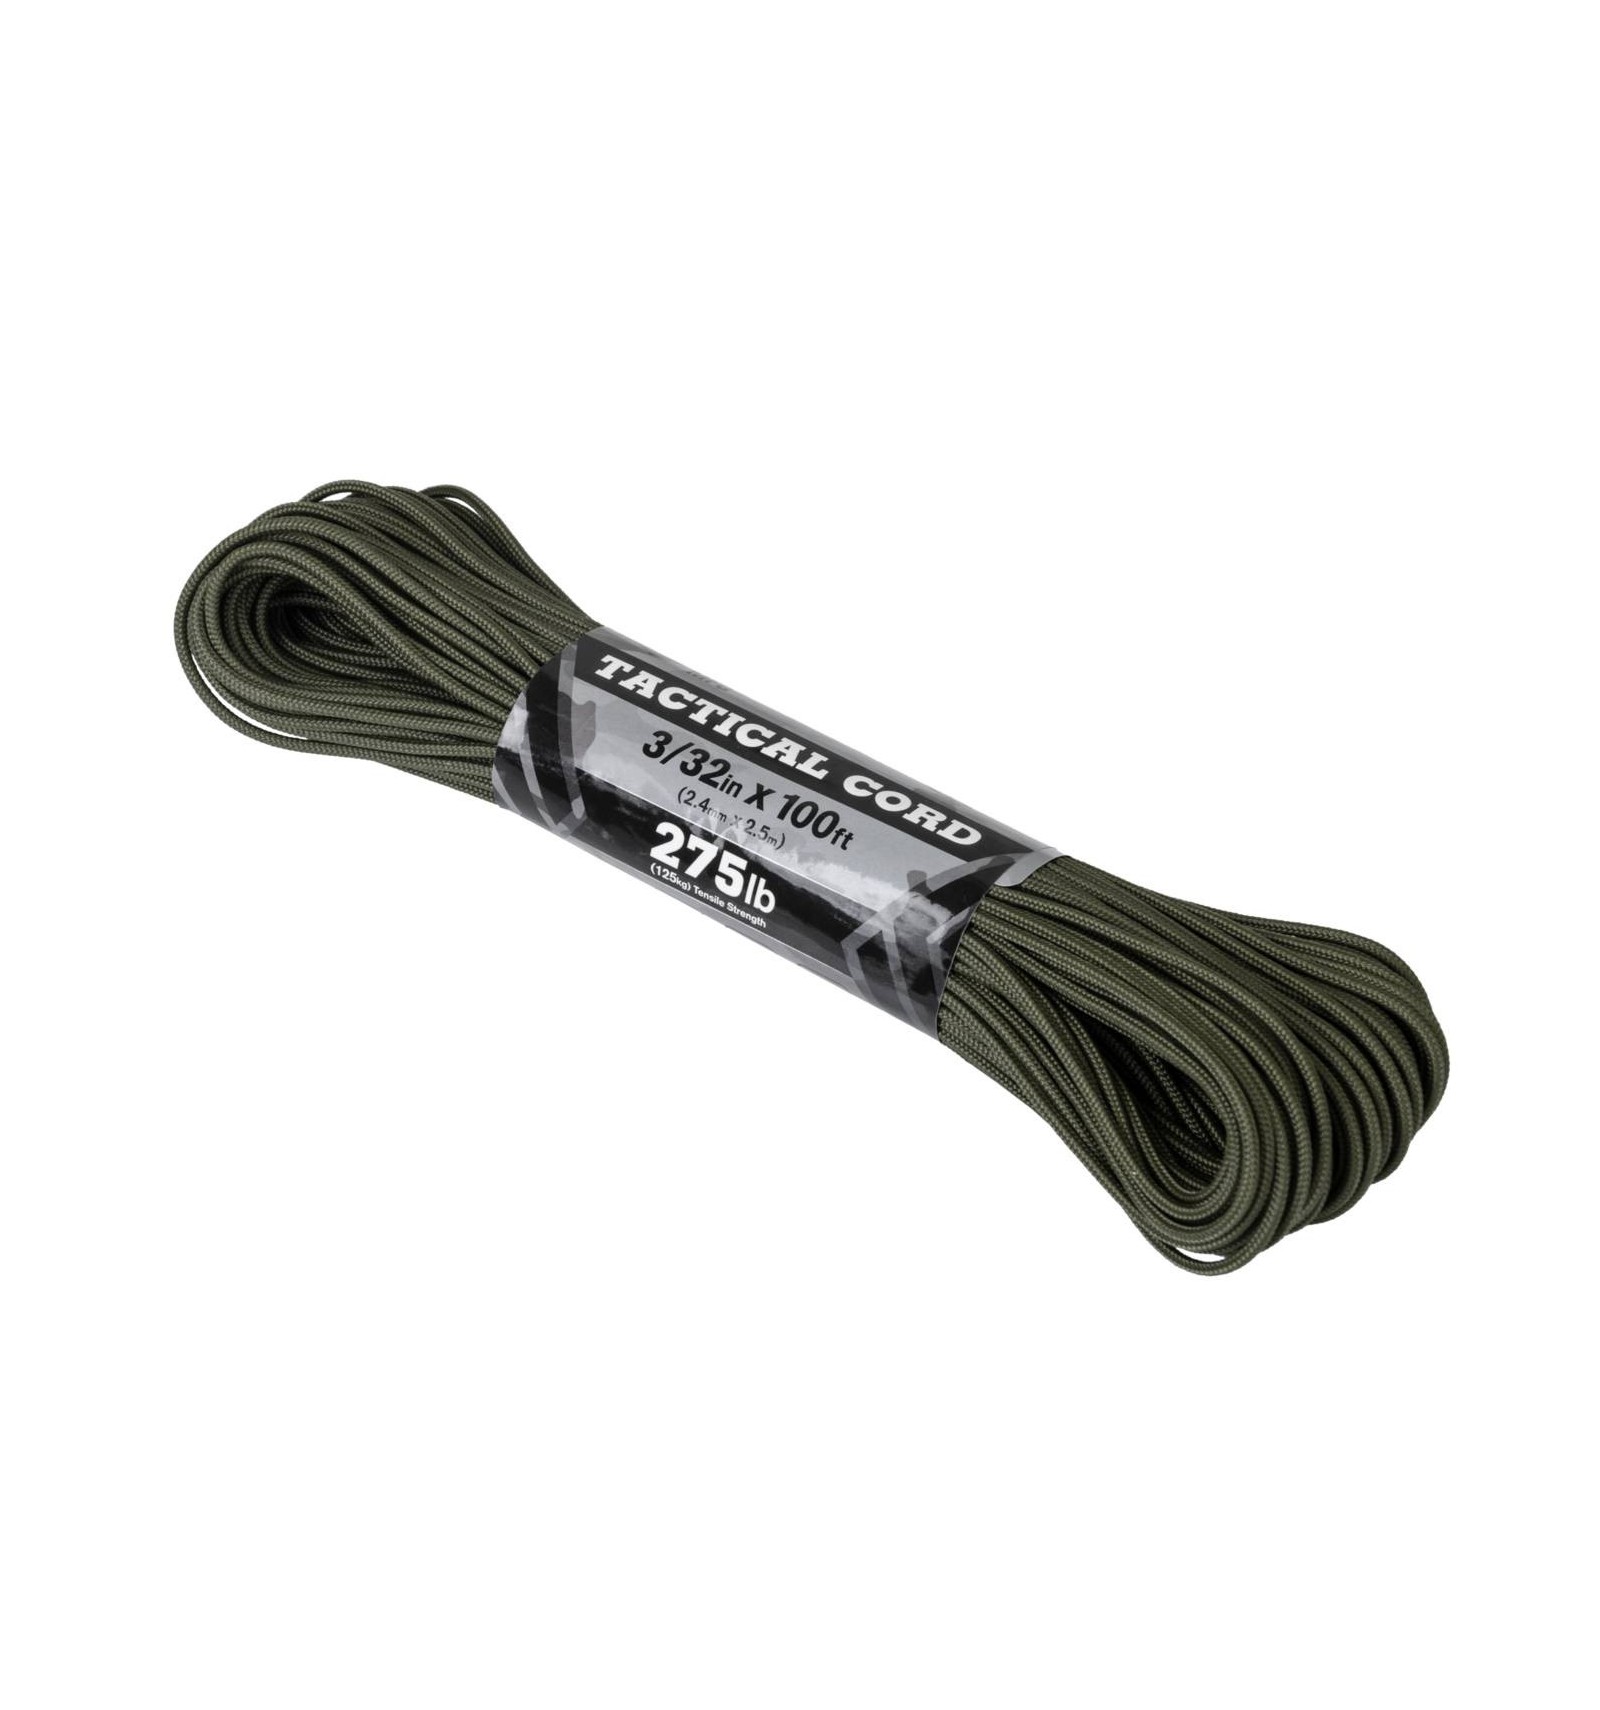 https://outpost-shop.com/45324-thickbox_default/atwood-275-paracord-100ft.jpg